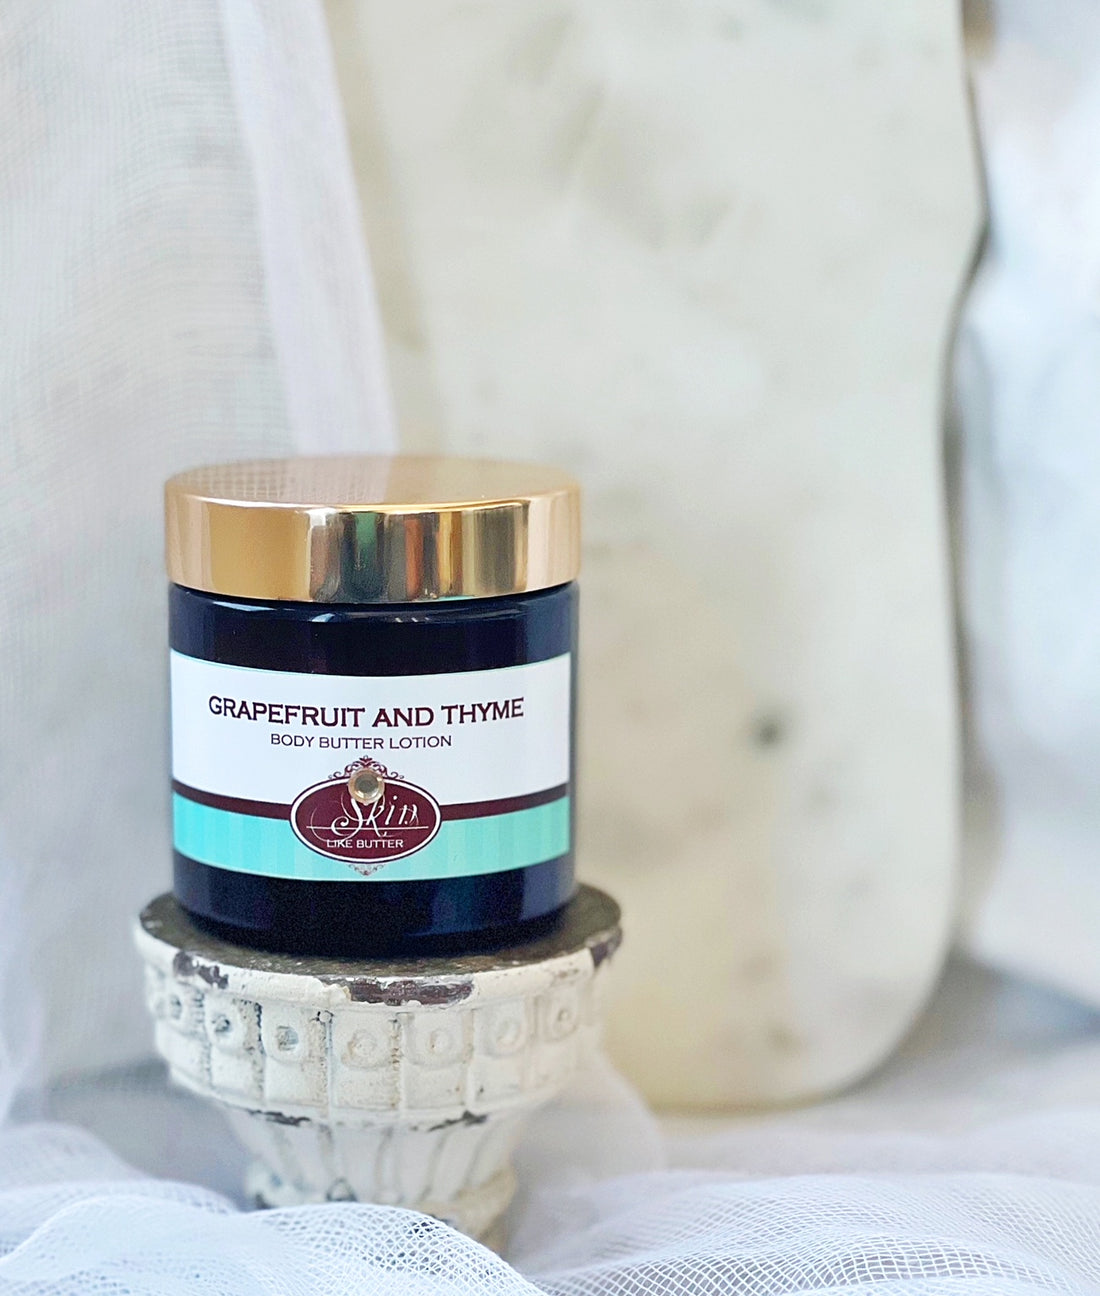 ELDER FLOWER AND QUINCE  scented Body Butter that's vegan, and water free